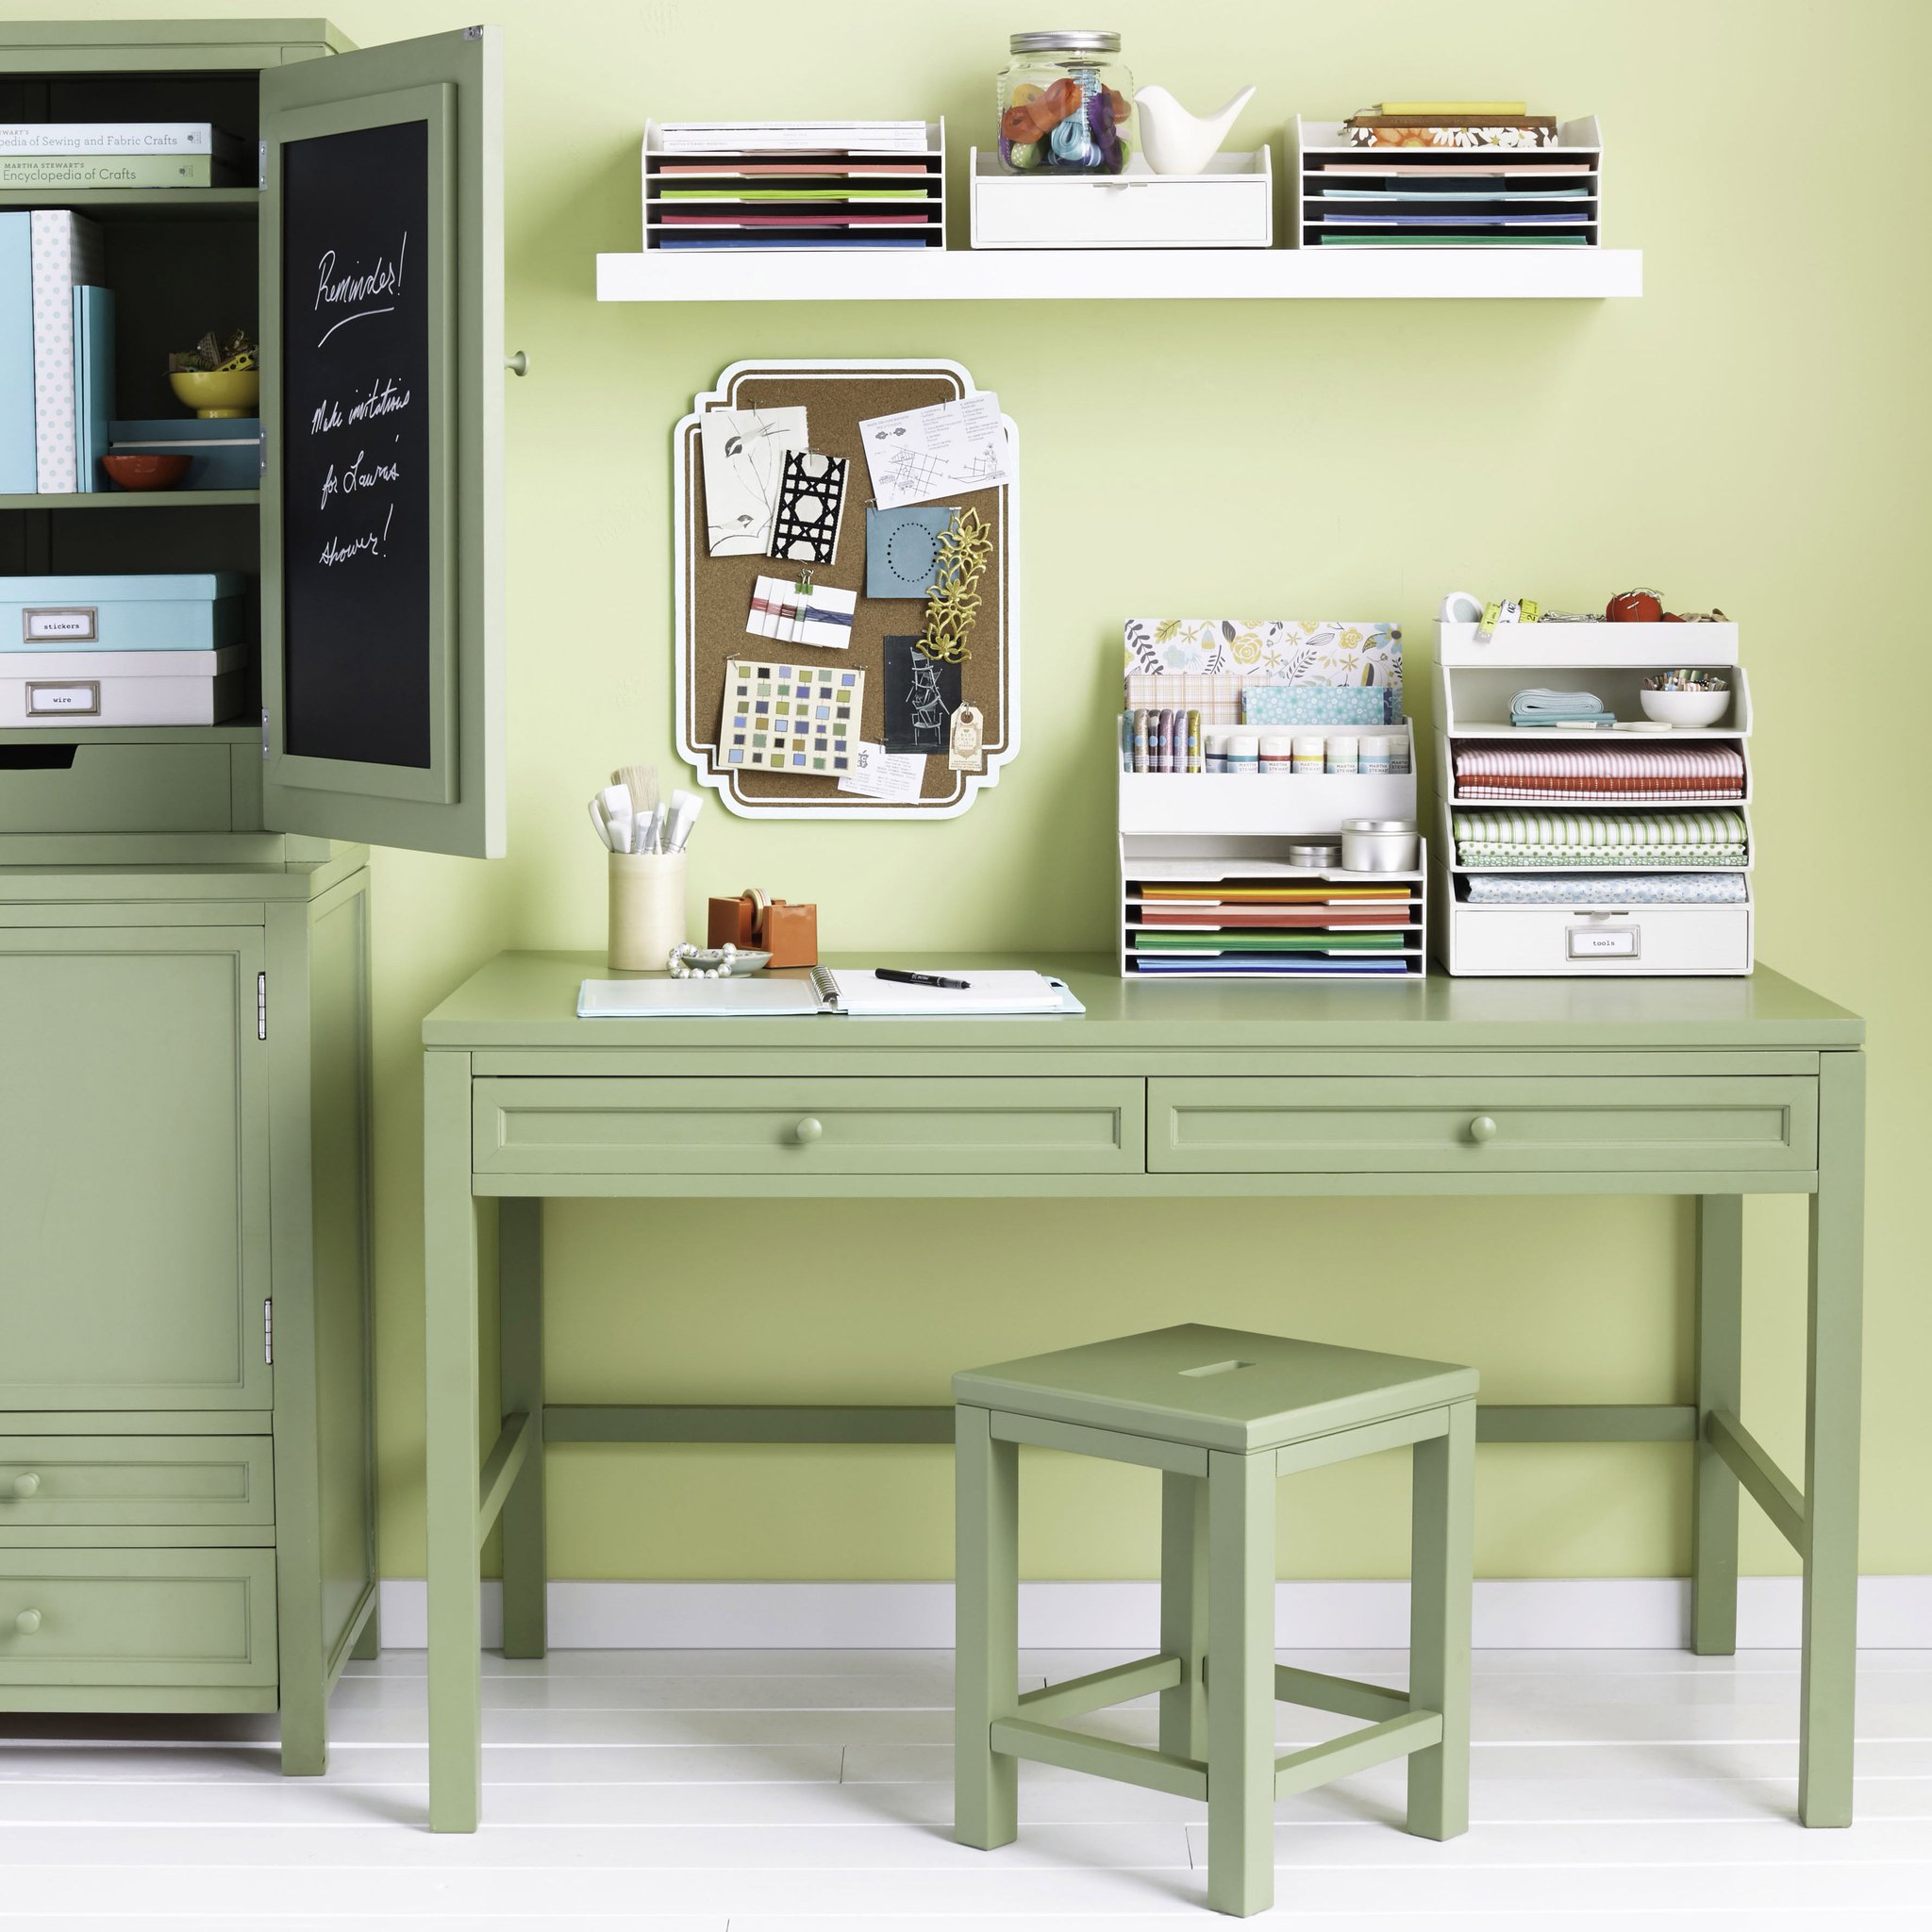 Martha Stewart Living On Twitter Get Your Home Organized Before